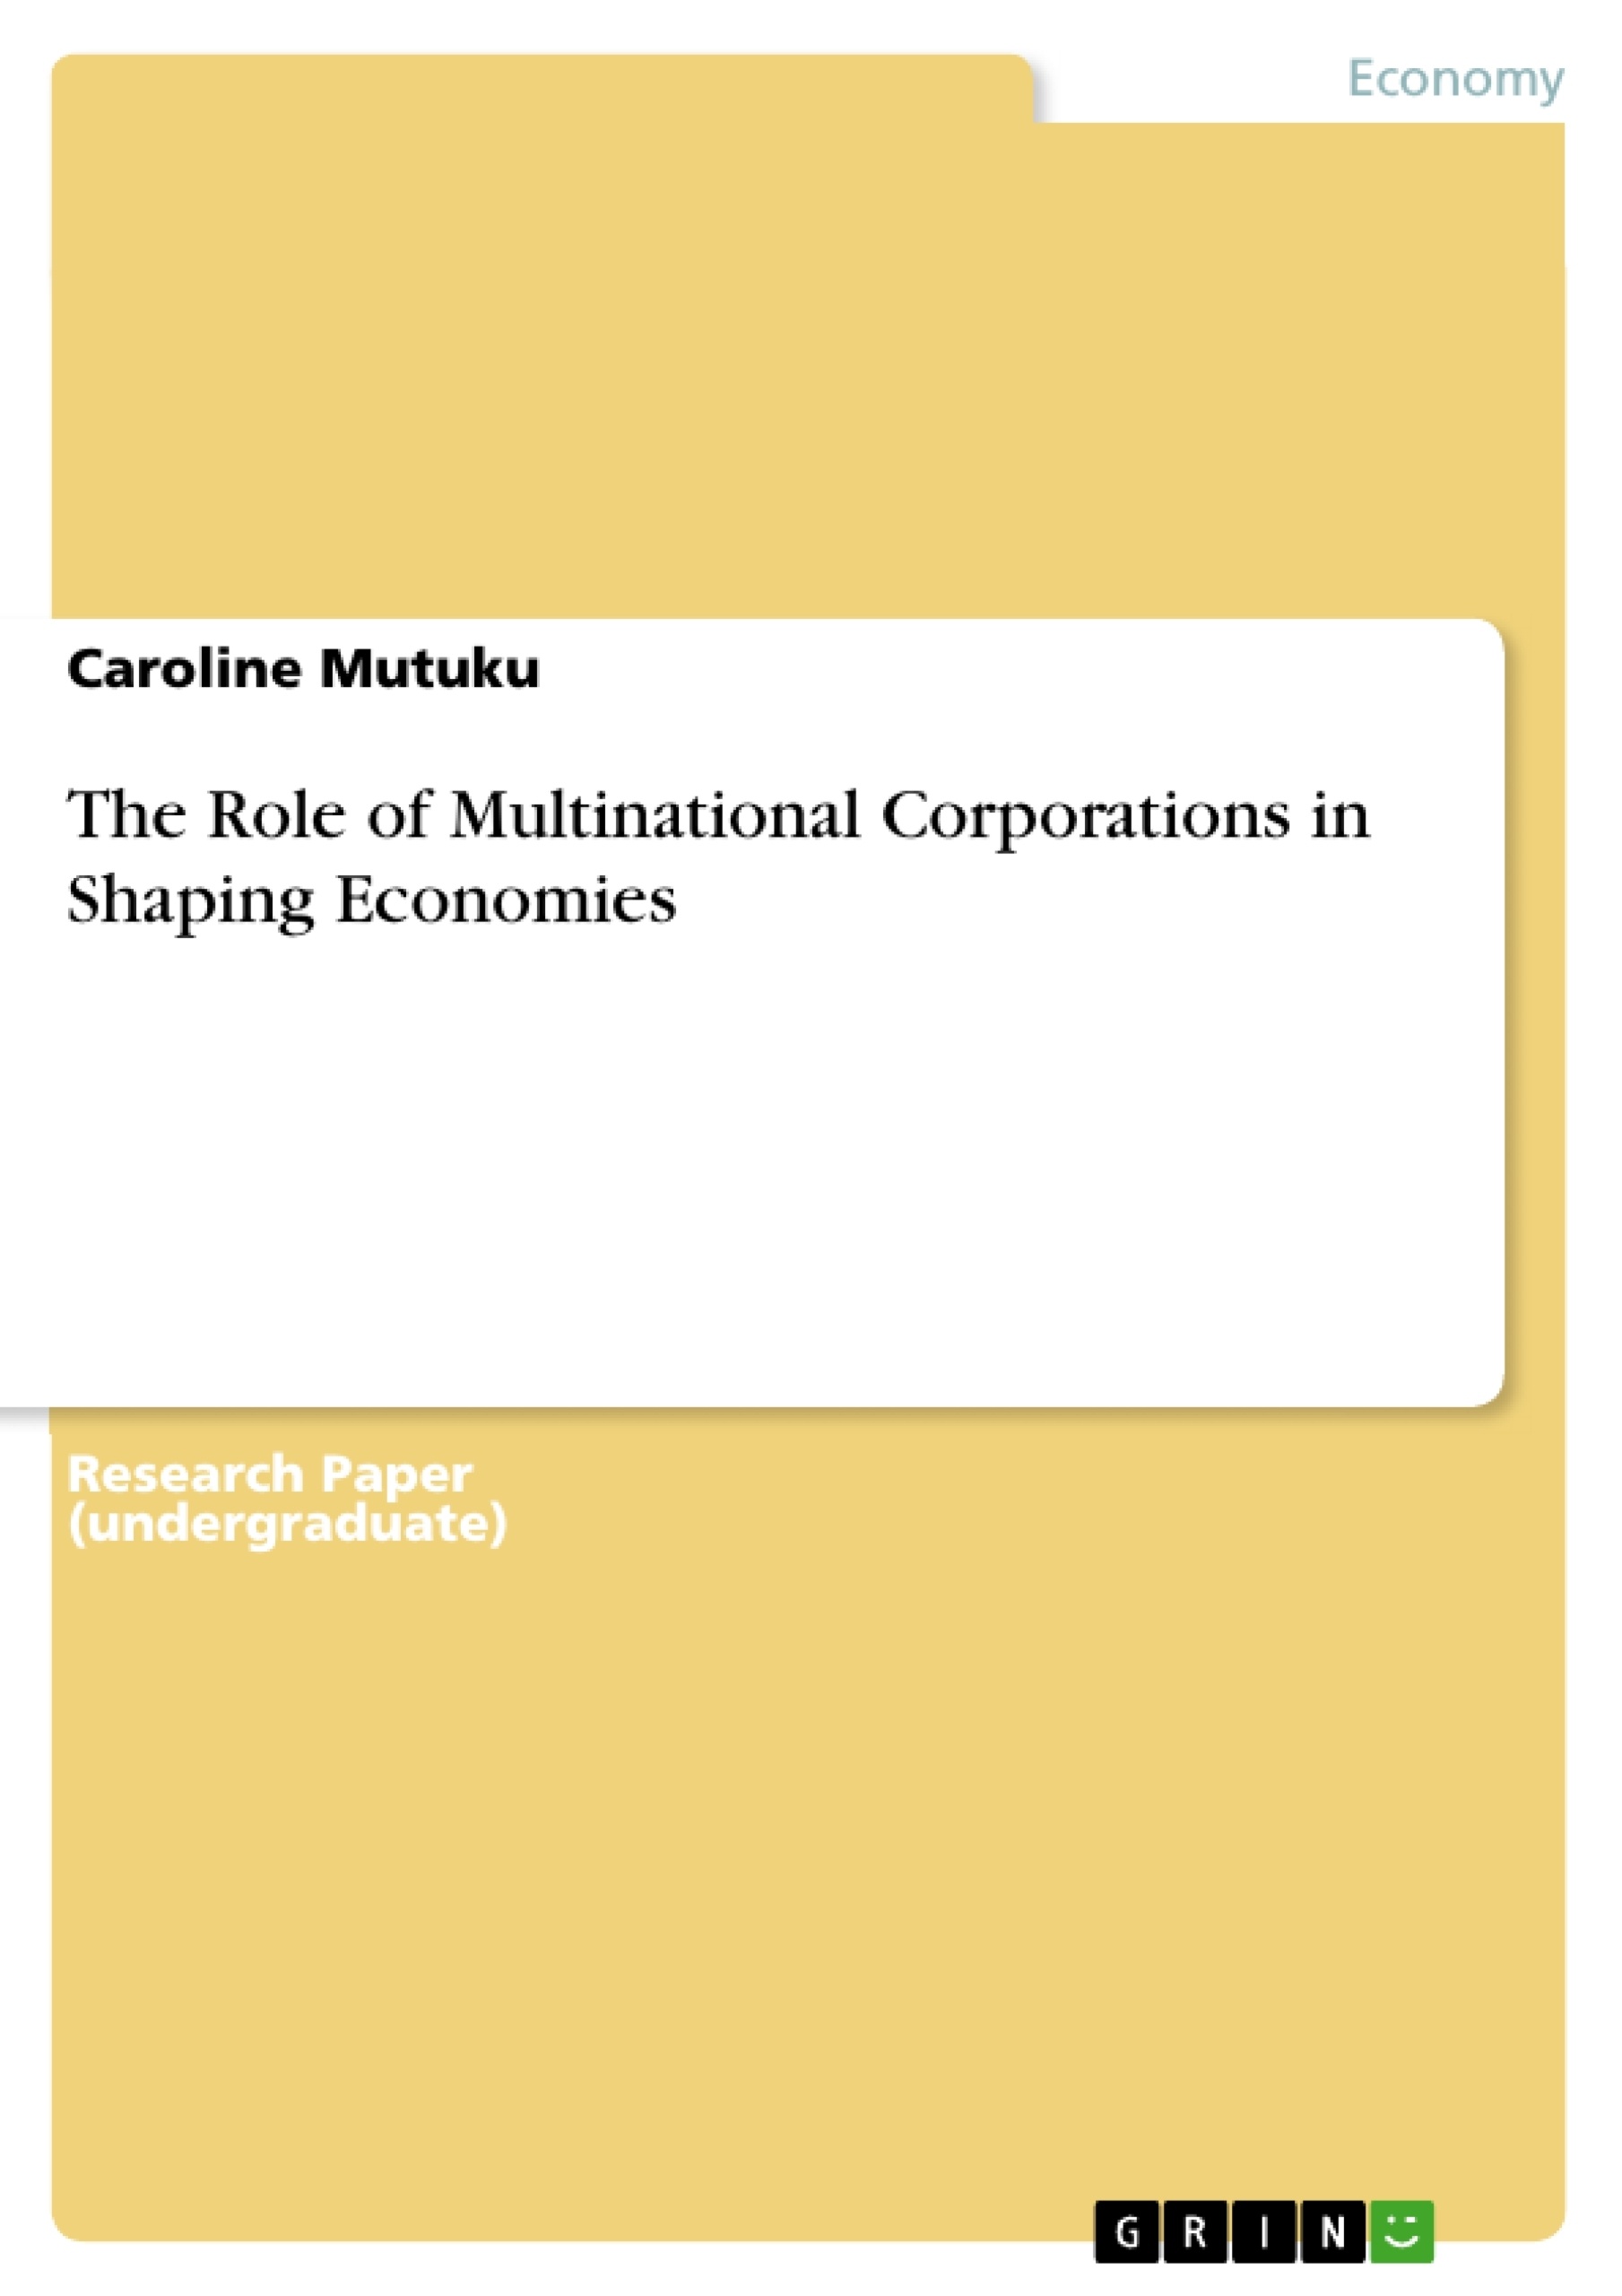 Título: The Role of Multinational Corporations in Shaping Economies